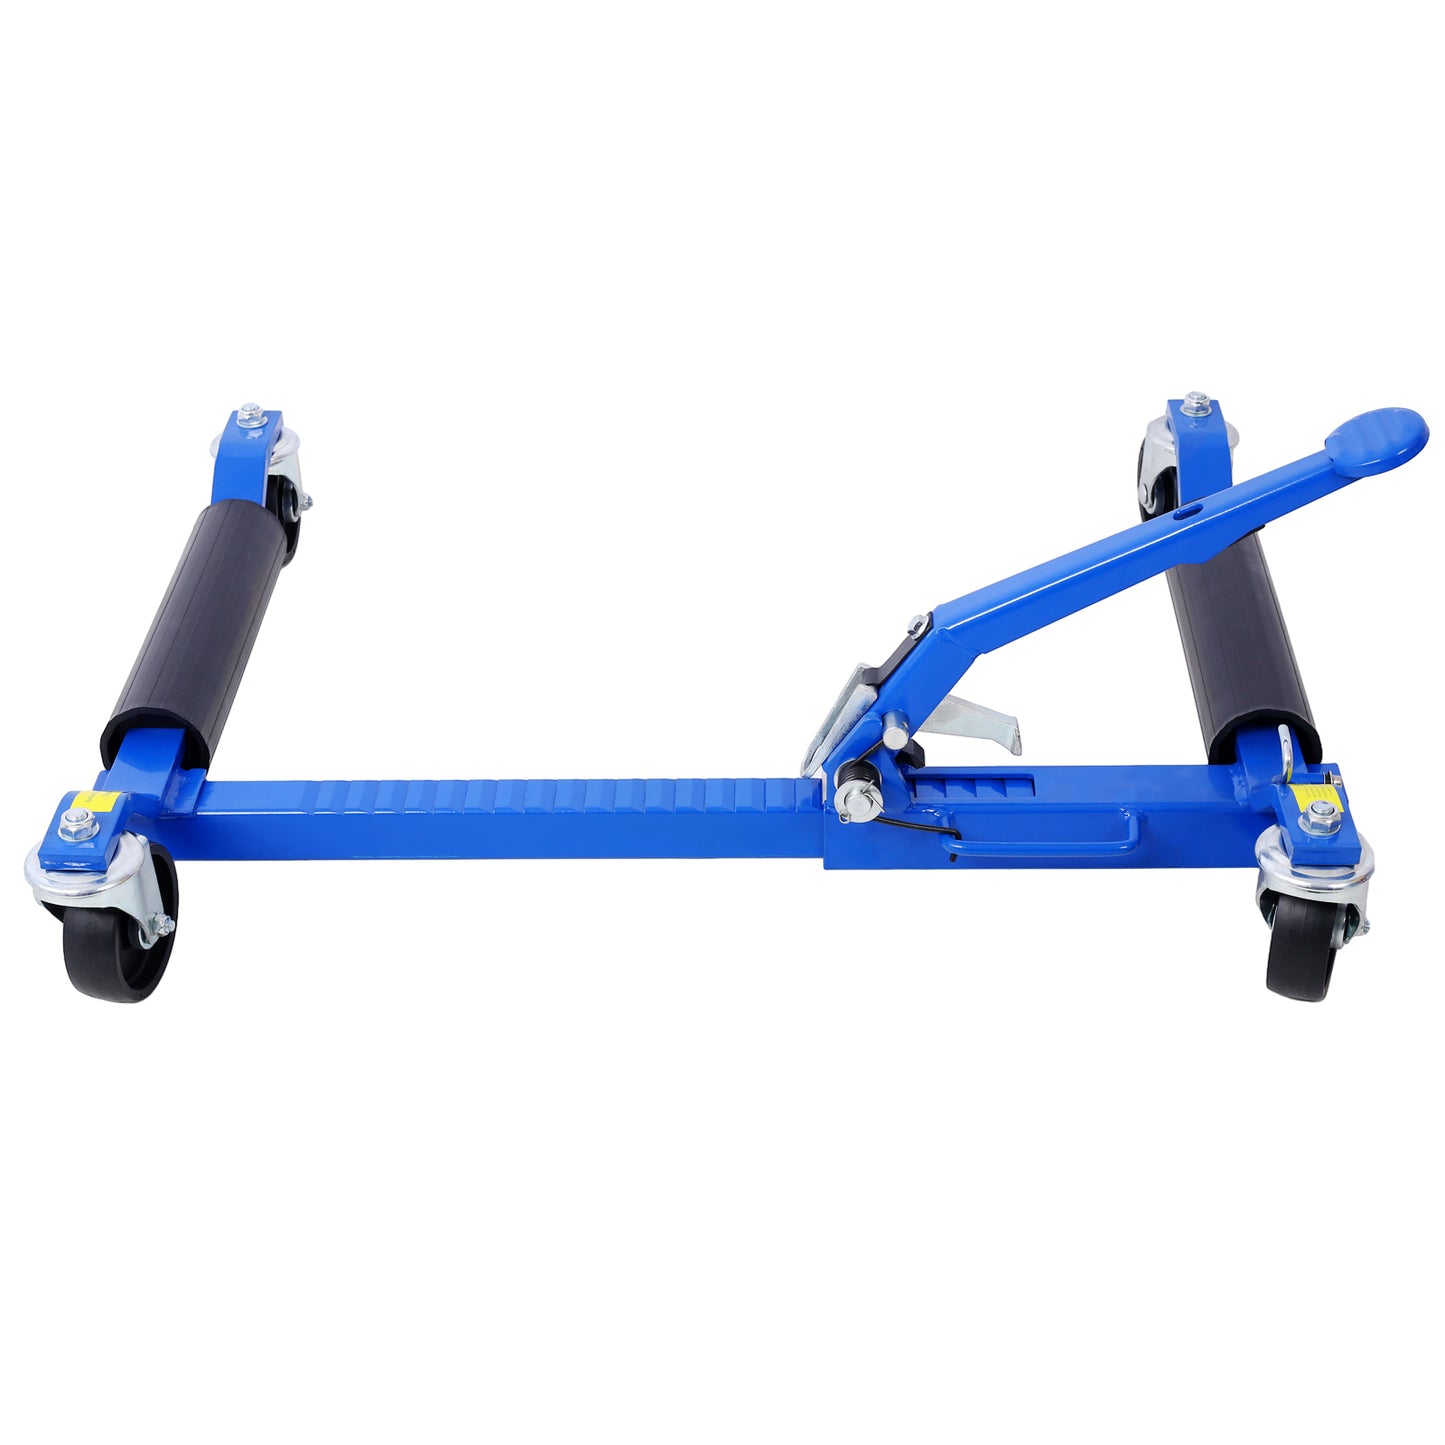 Set of (2) Wheel Dolly Car Skates Vehicle Positioning Hydraulic Tire Jack Ratcheting Foot Pedal Lift Hydraulic Car Wheel Dolly, 1,500lbs blue